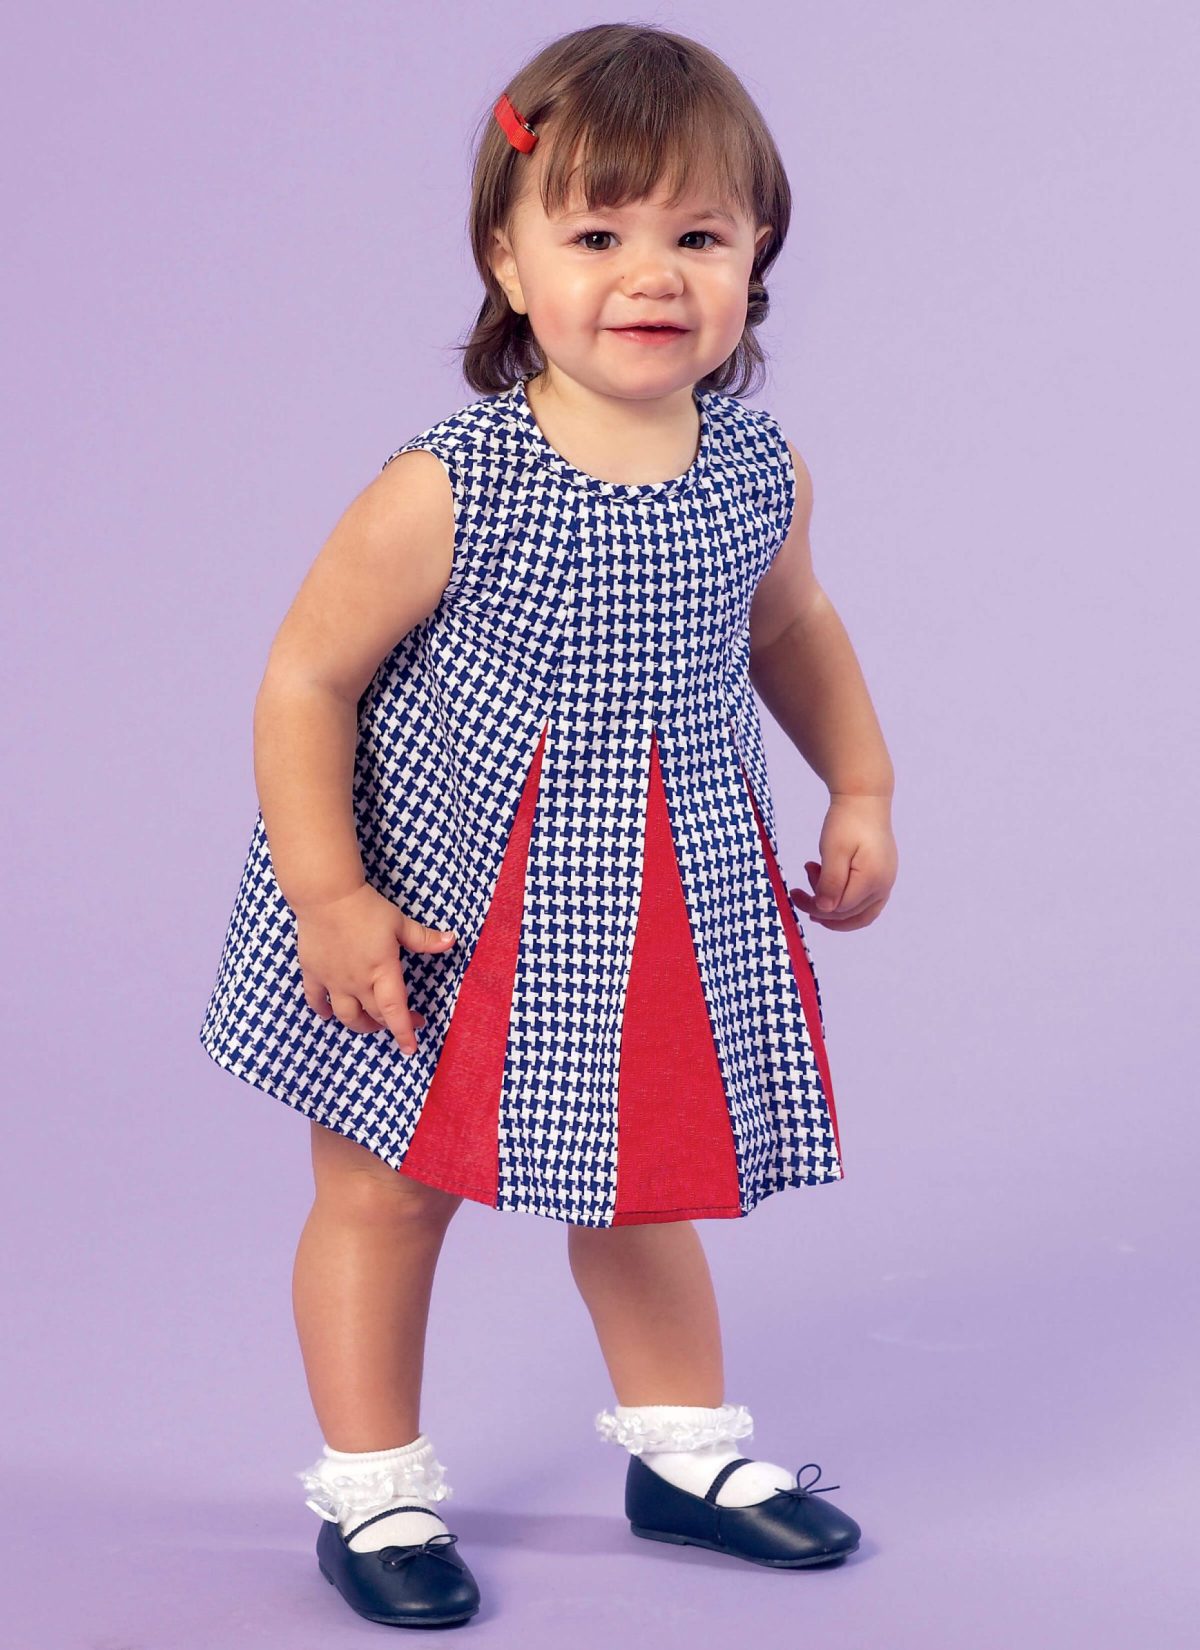 McCall's Sewing Pattern M7177 Infants' Dresses and Panties